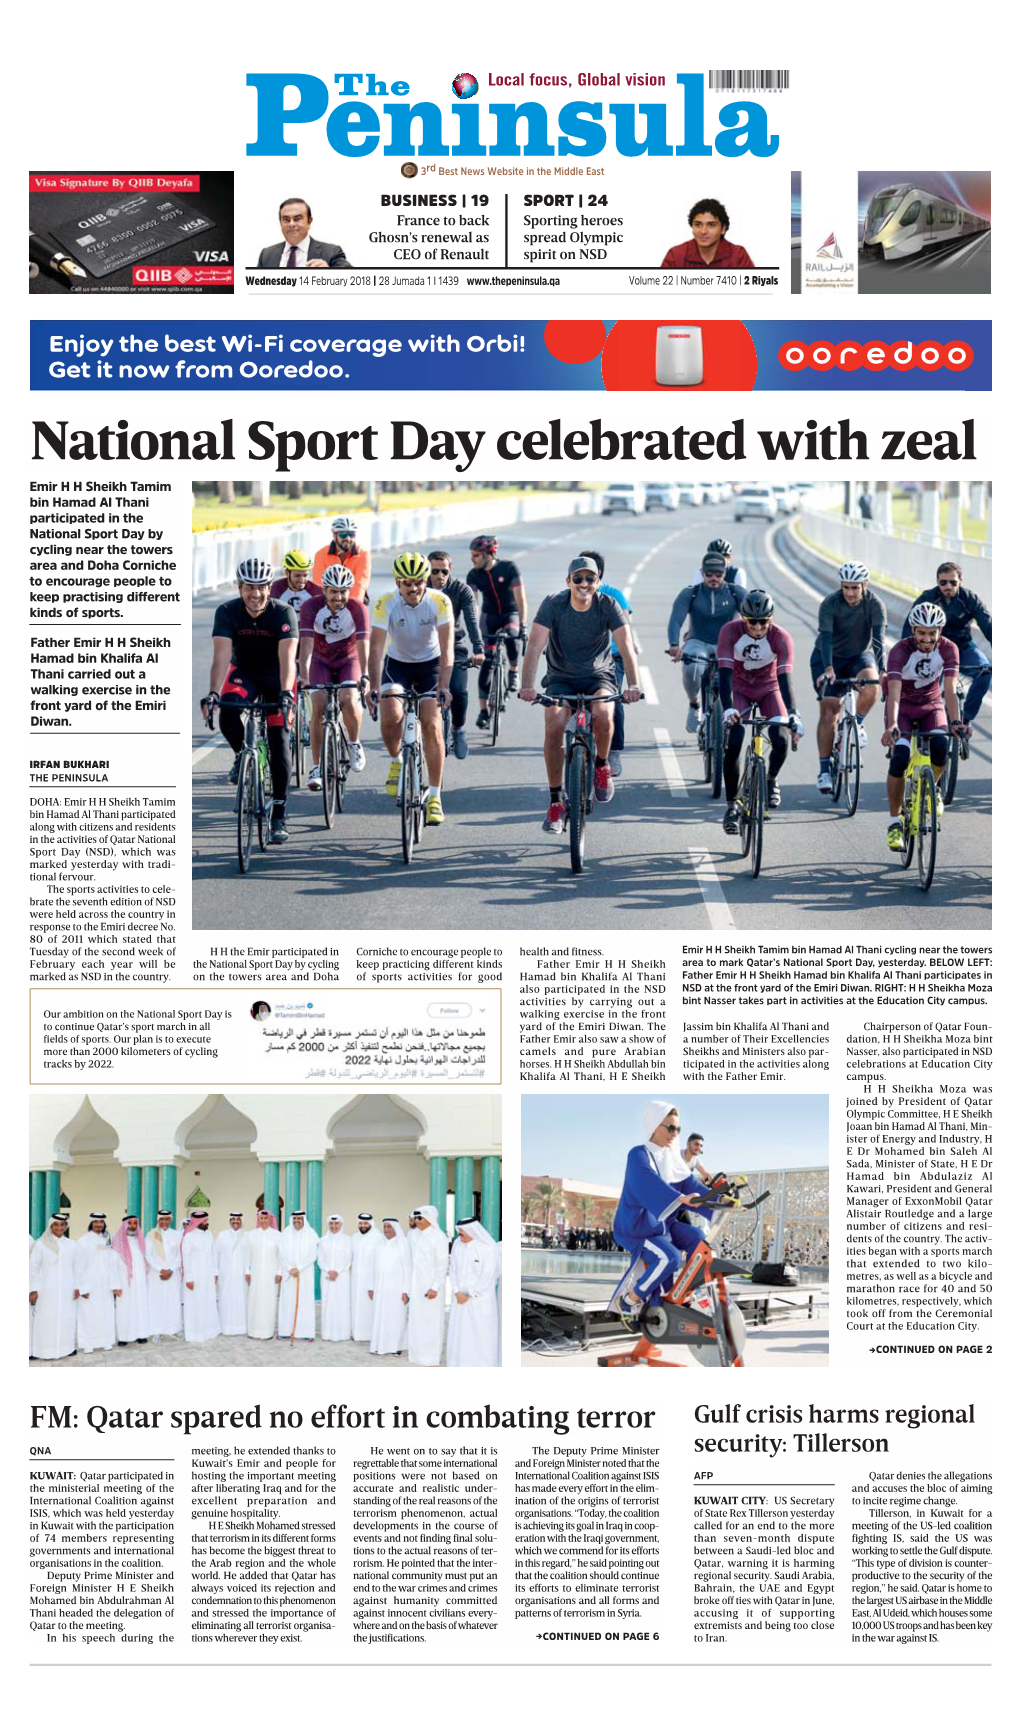 National Sport Day Celebrated with Zeal